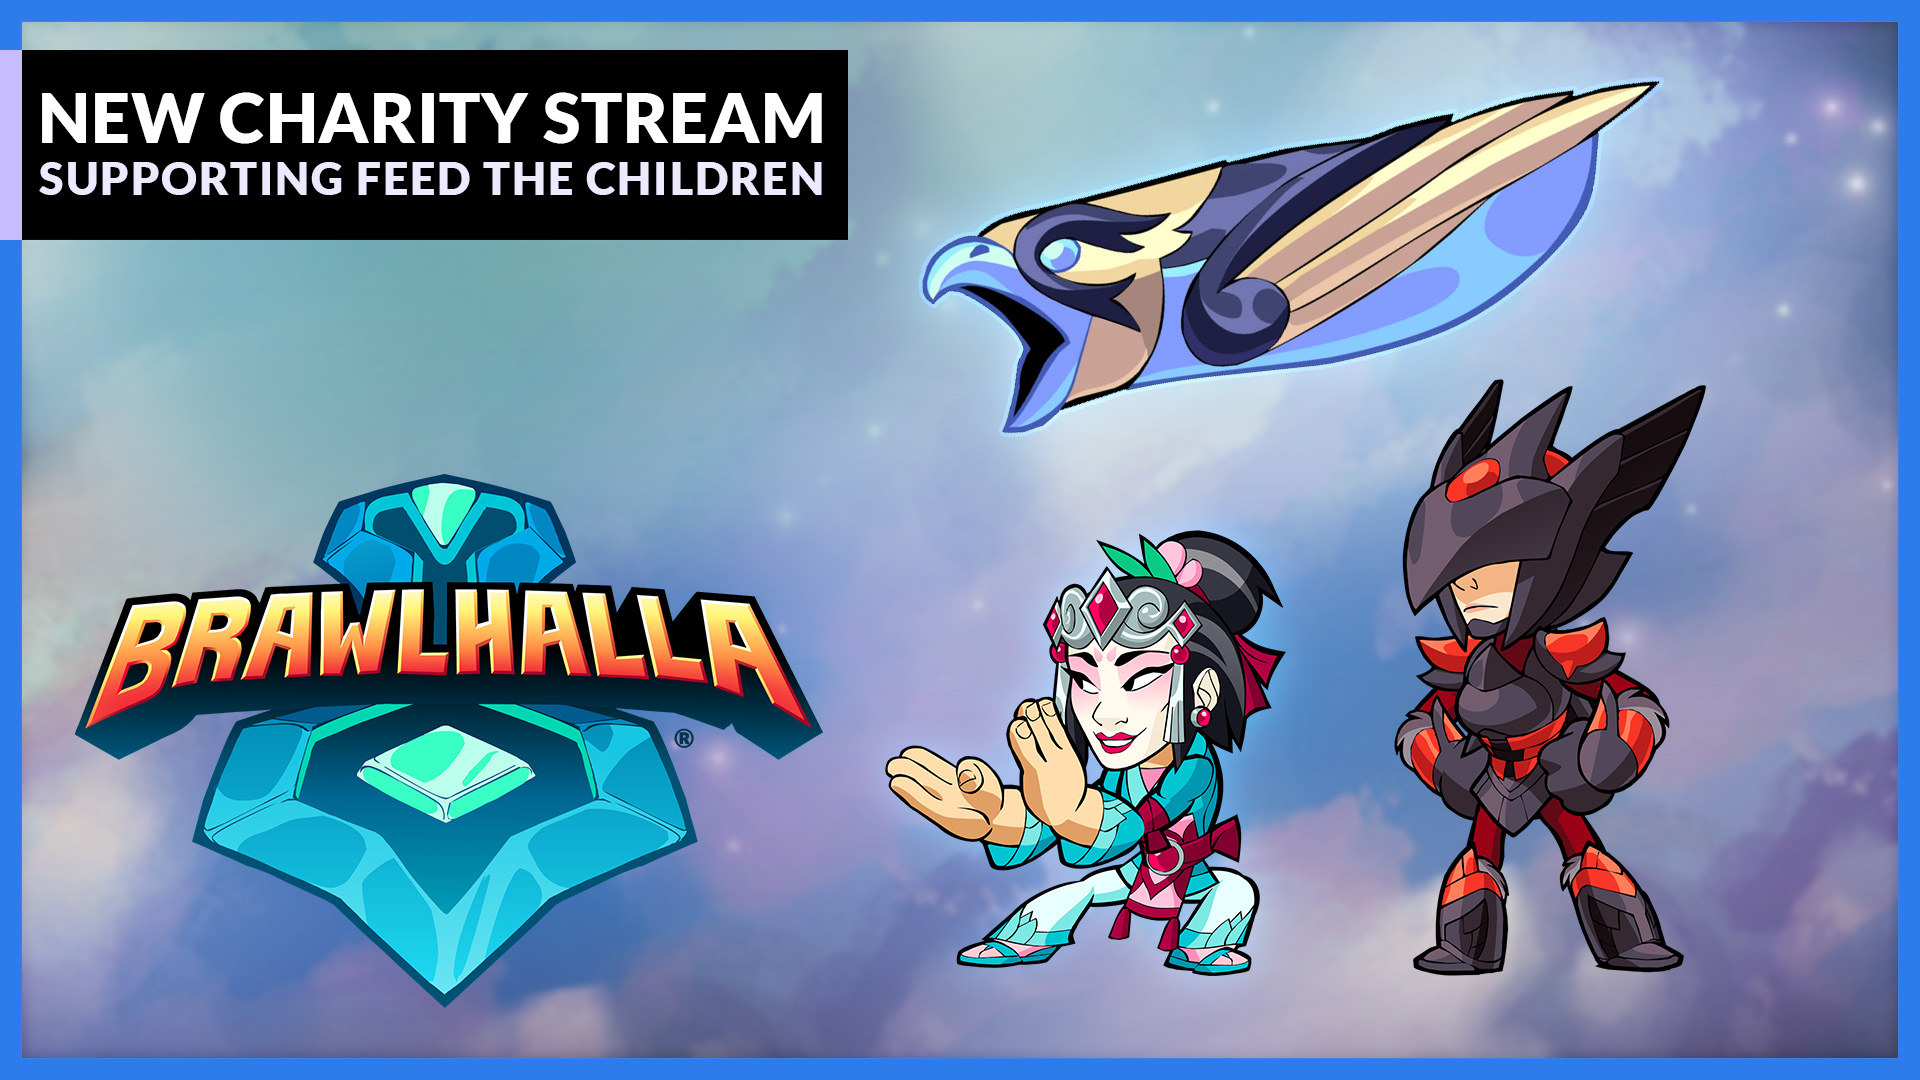 Brawlhalla’s August 2022 Charity Stream to Benefit Feed the Children!